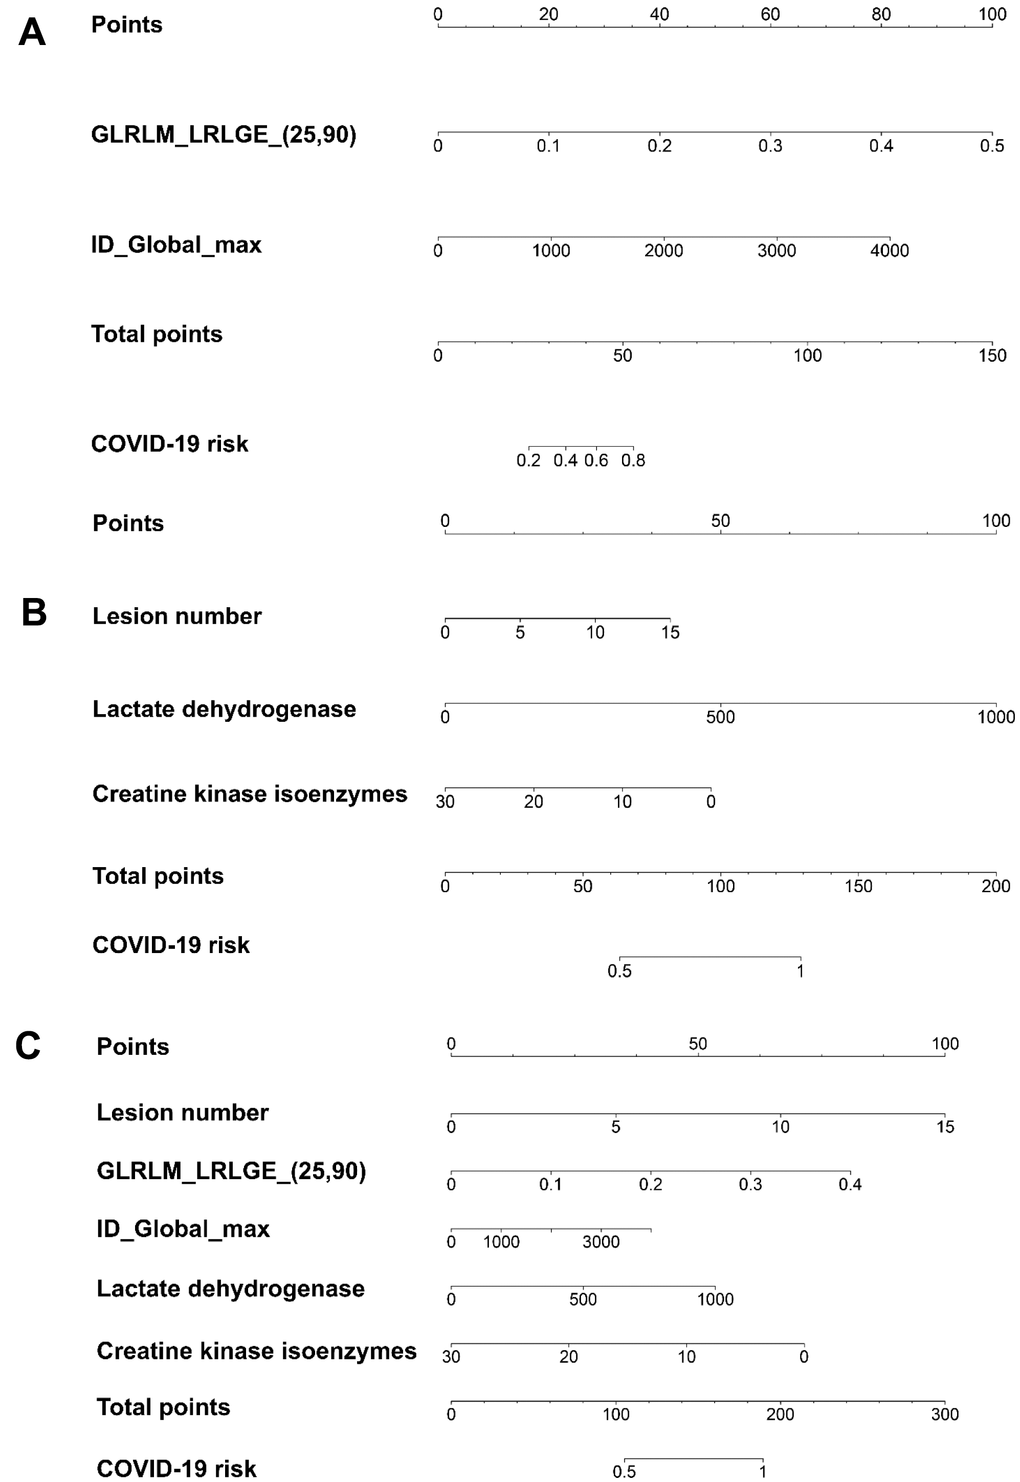 The patient-based COVID-19 risk scores demonstrated by nomograms. (A) The risk score using radiomic features only. (B) The risk score using clinical factors only. (C) The risk score combining radiomic features and clinical factors. GLRLM